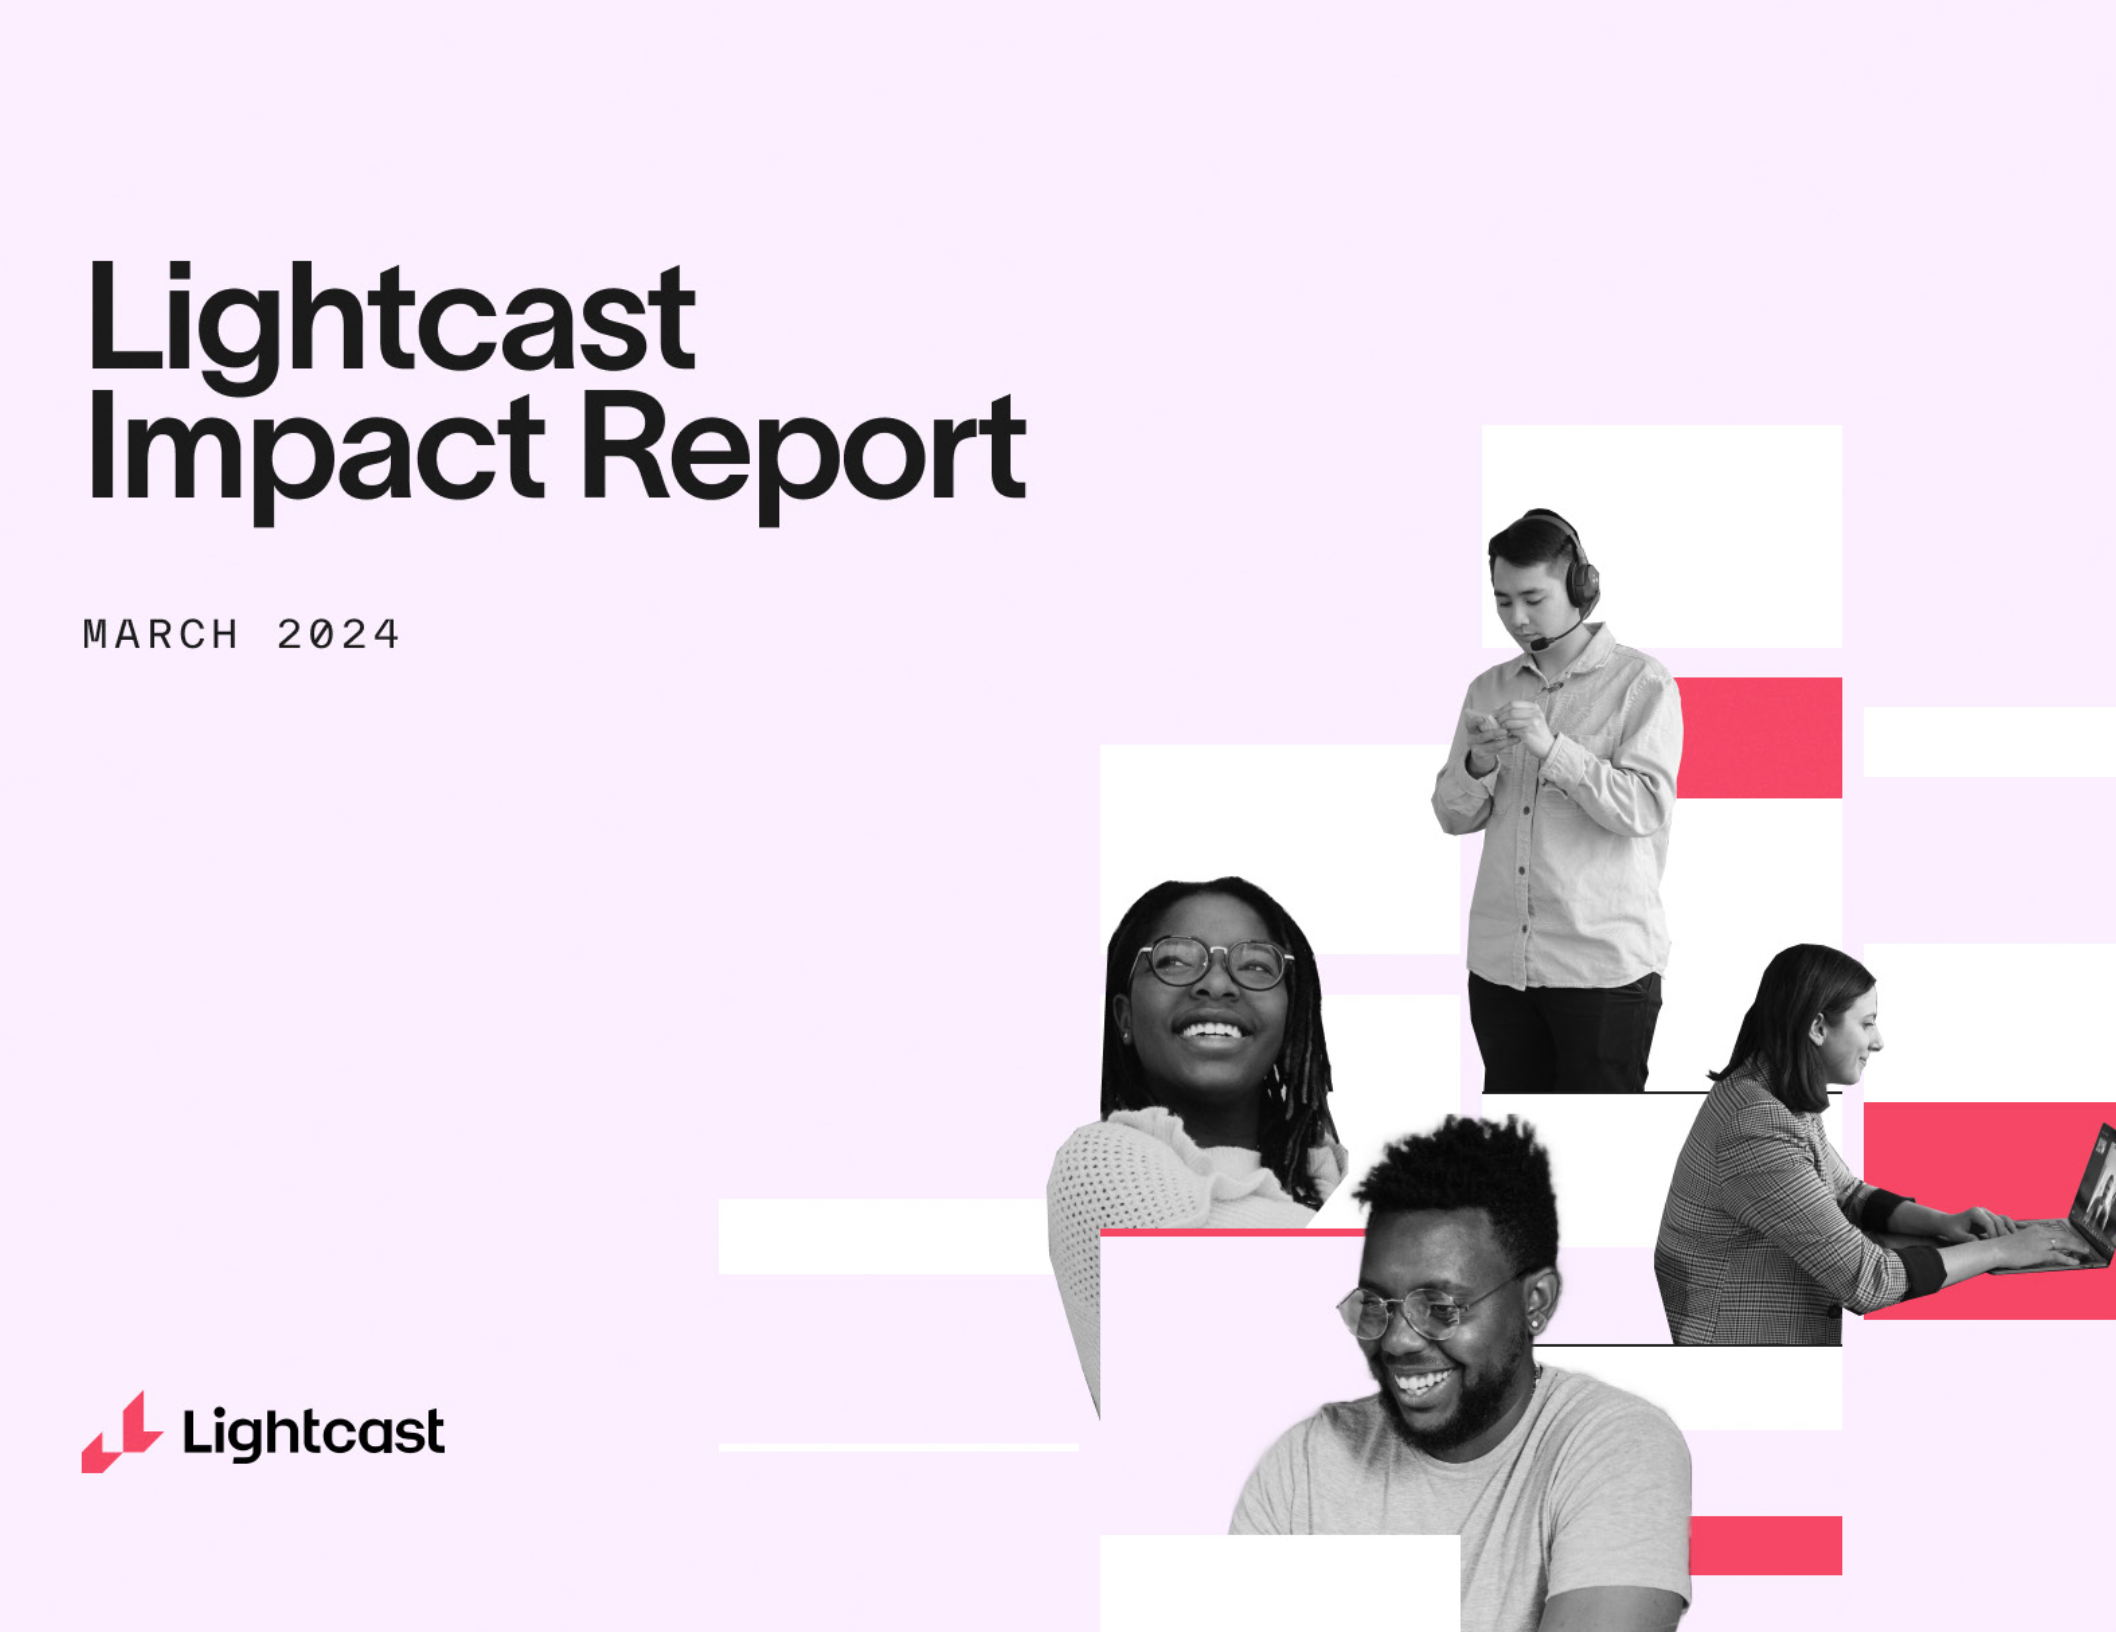 Impact Report 2024 cover